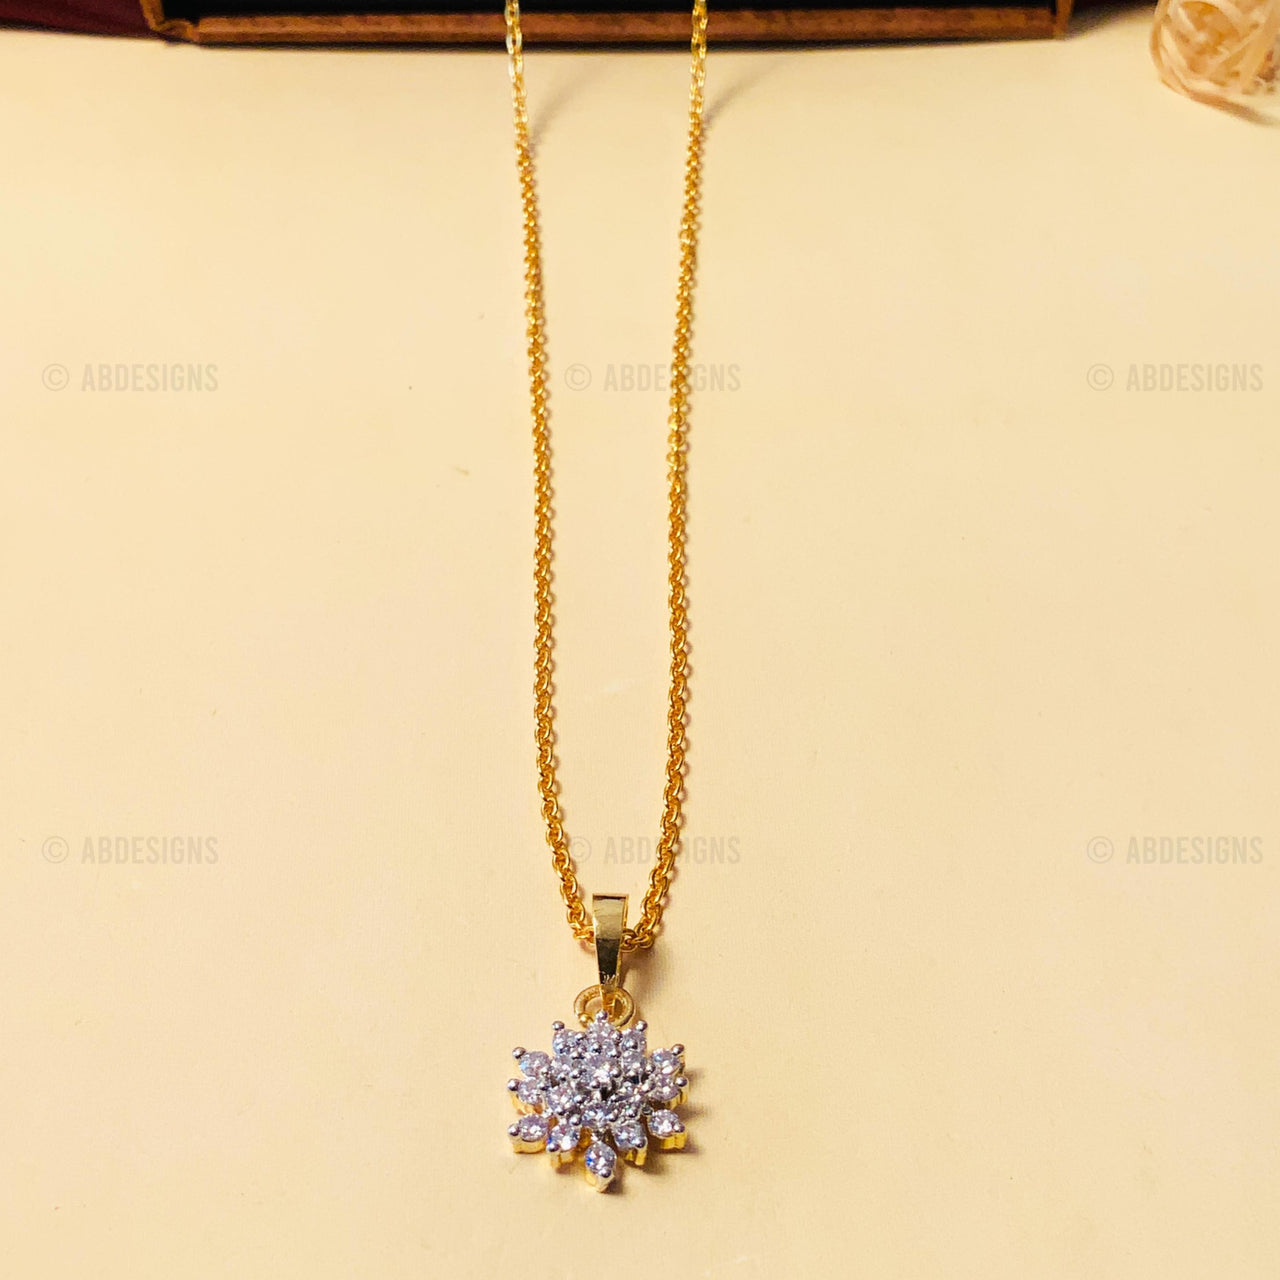 Precious High-Quality Gold Plated Pendant Chain